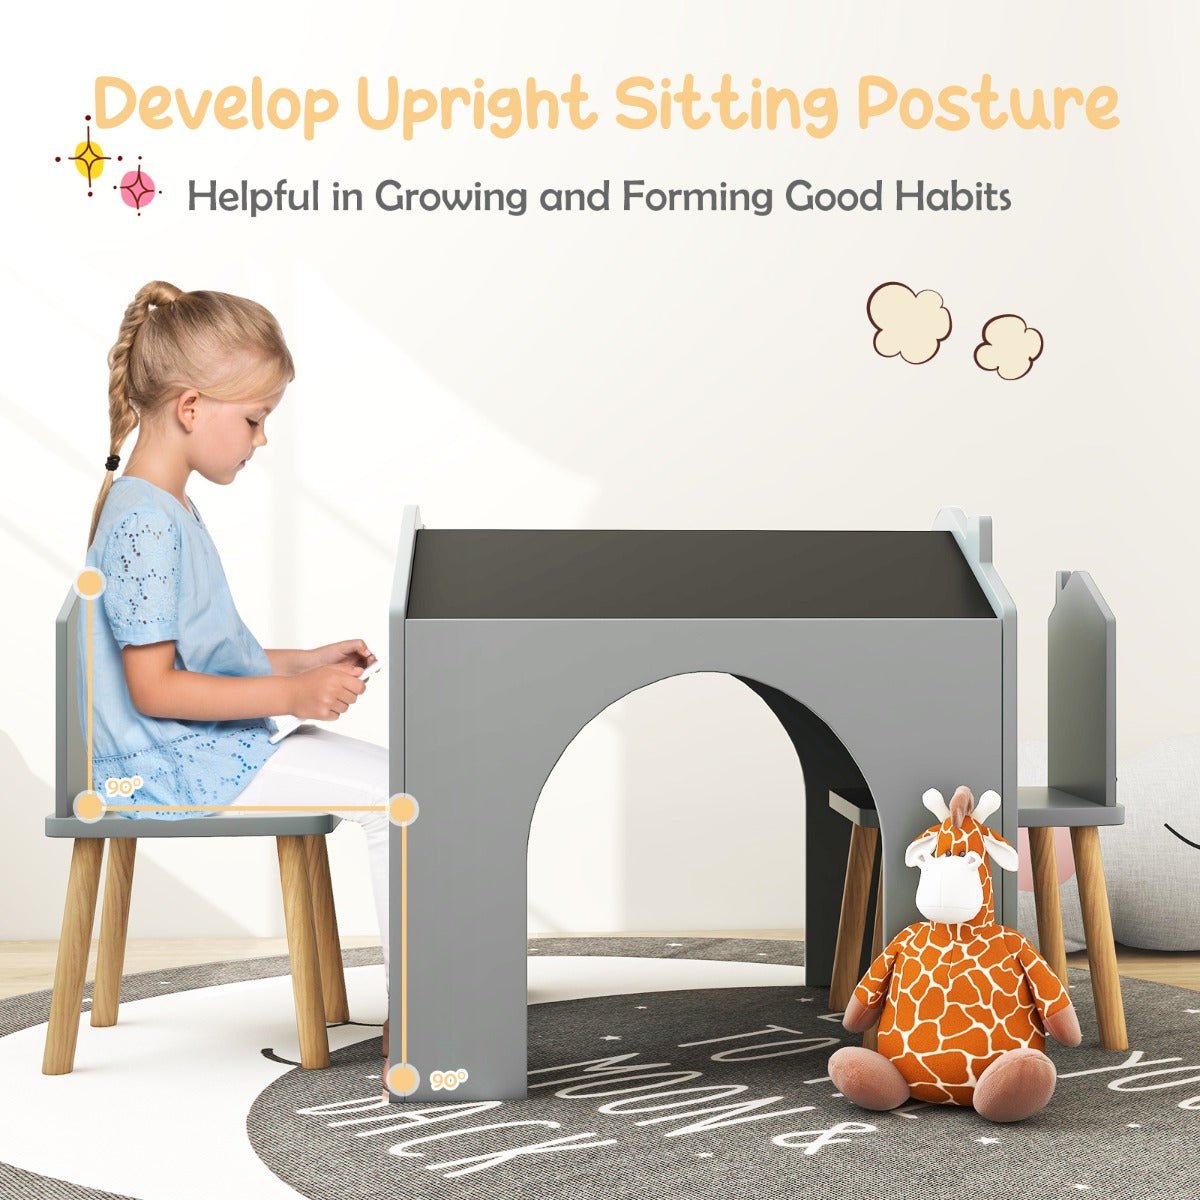 Kids Creative Zone: Grey Chalkboard Table and Chairs for Exploration